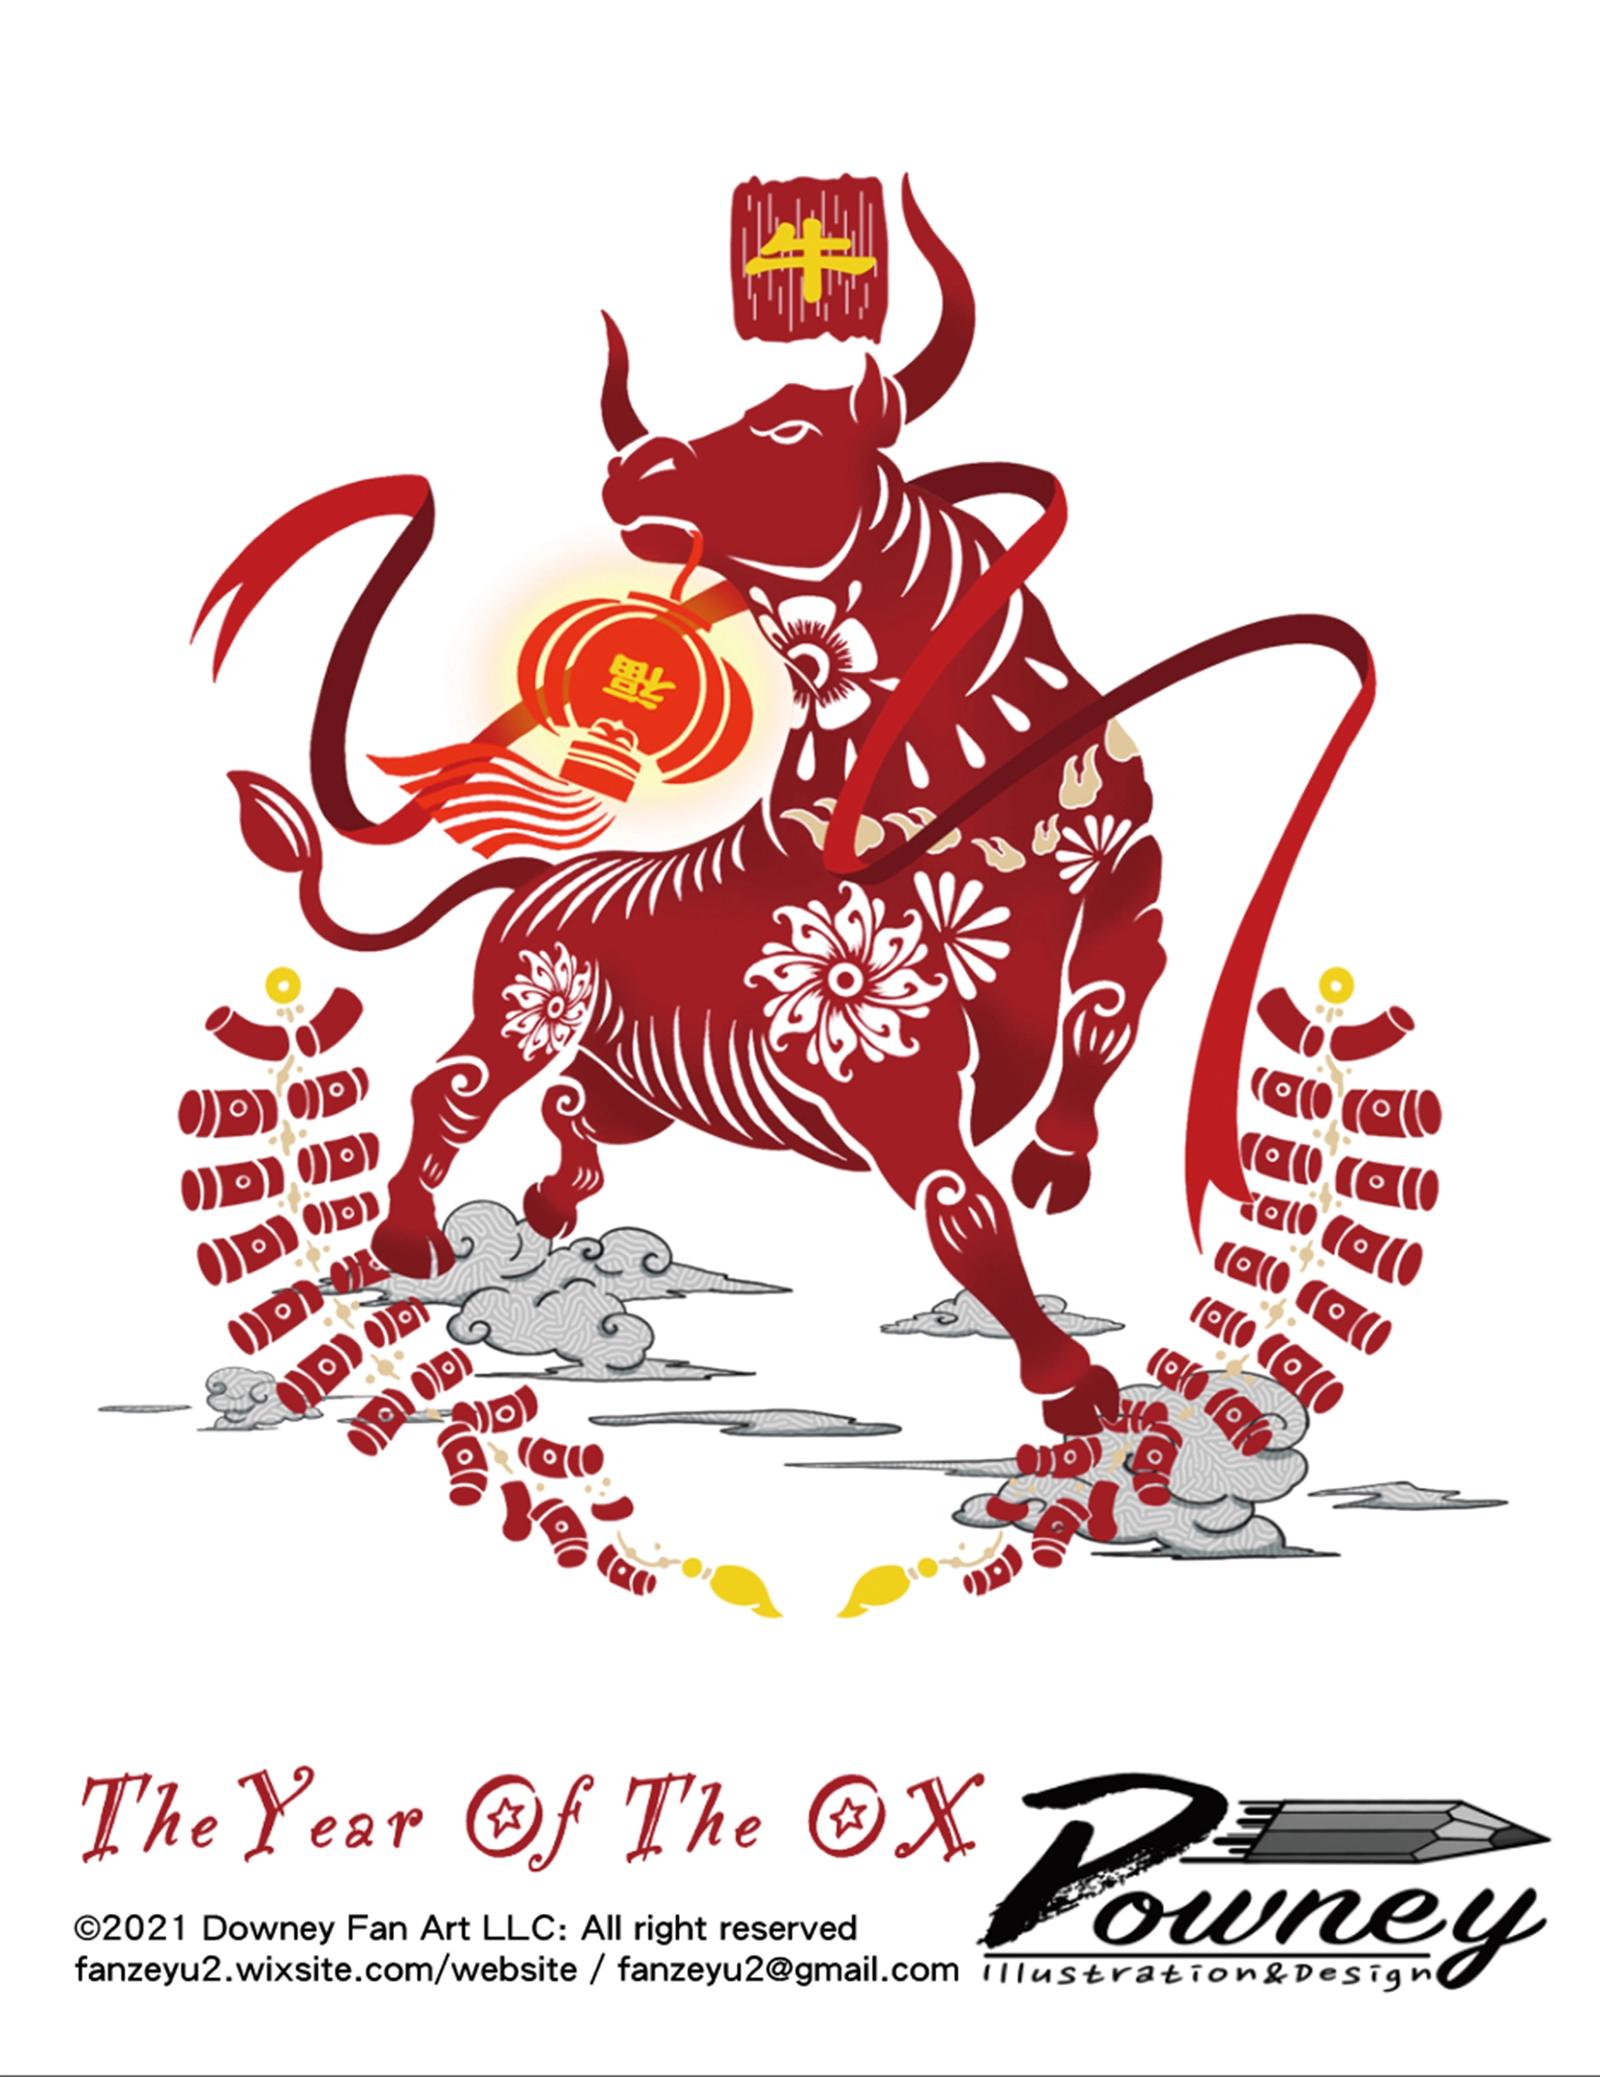 The Year of the OX